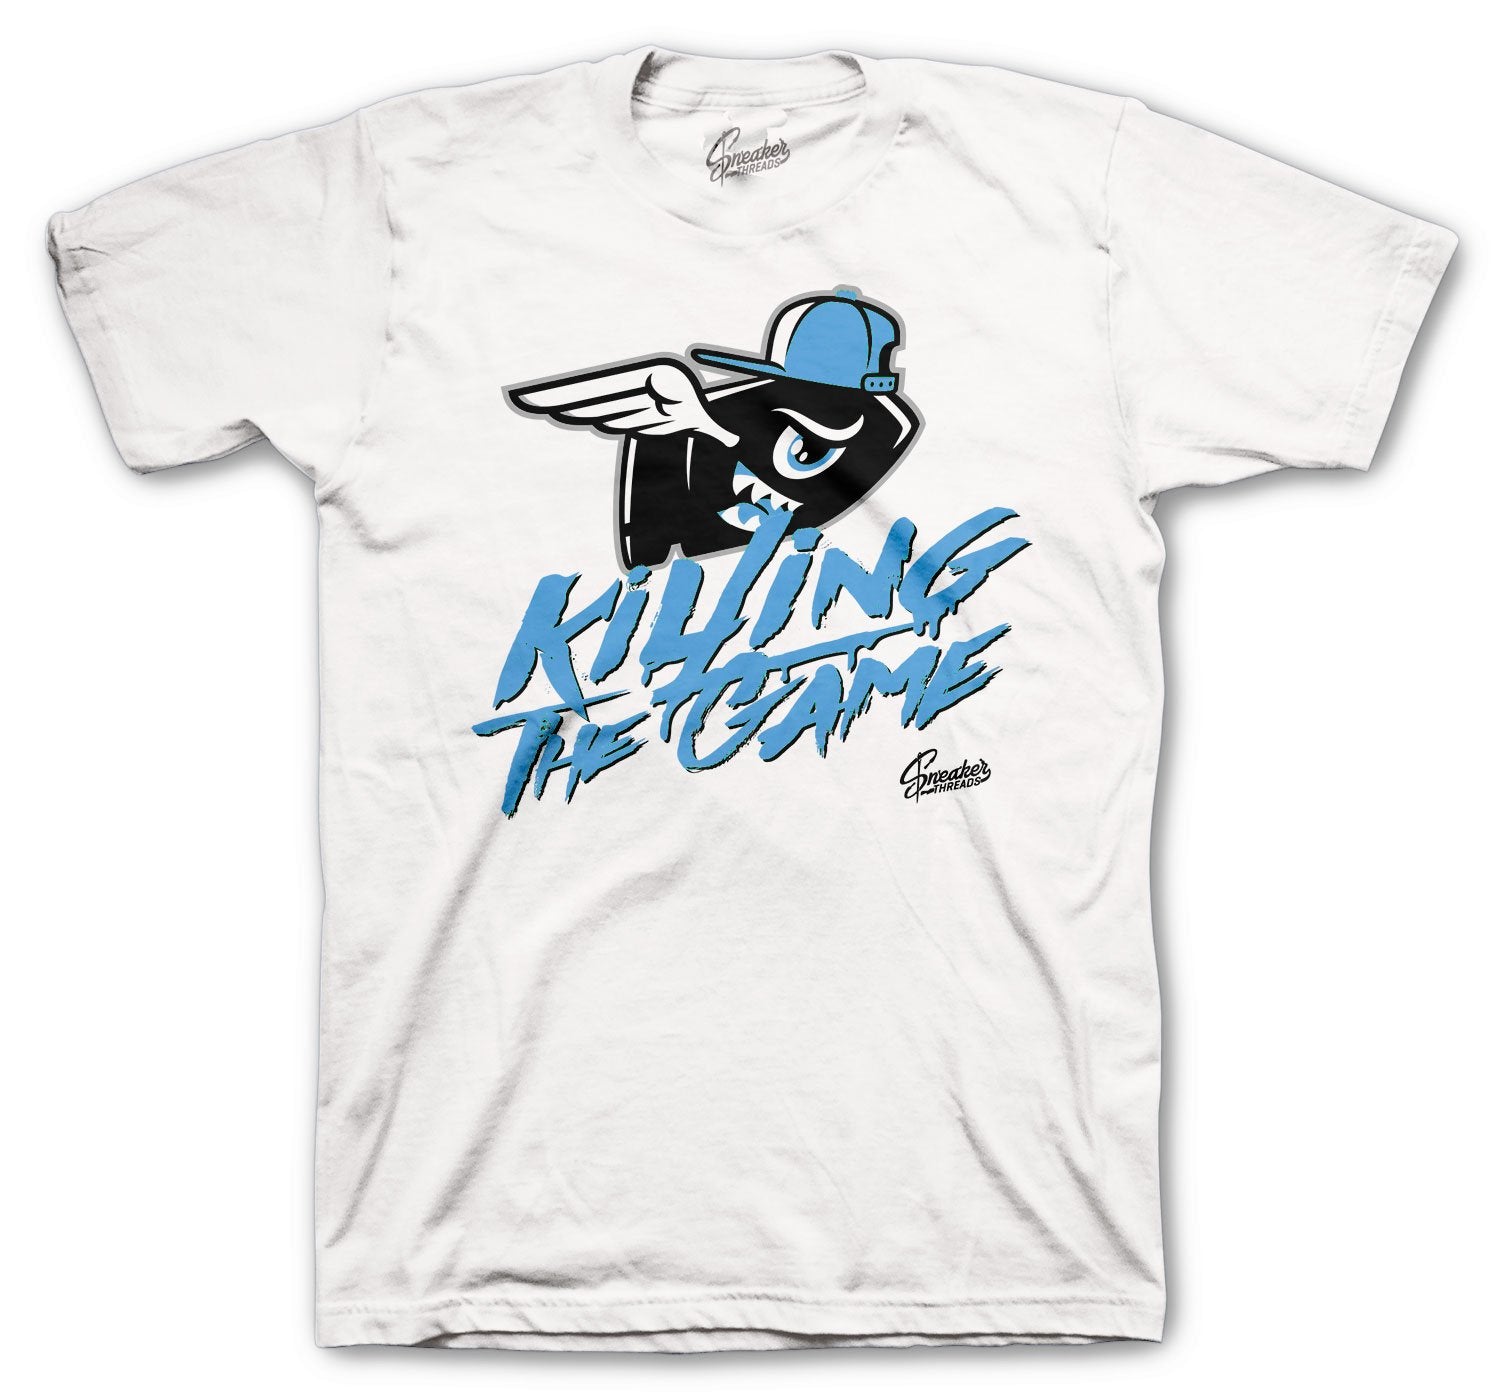 t shirt collection for men designed to match the Jordan 3 unc